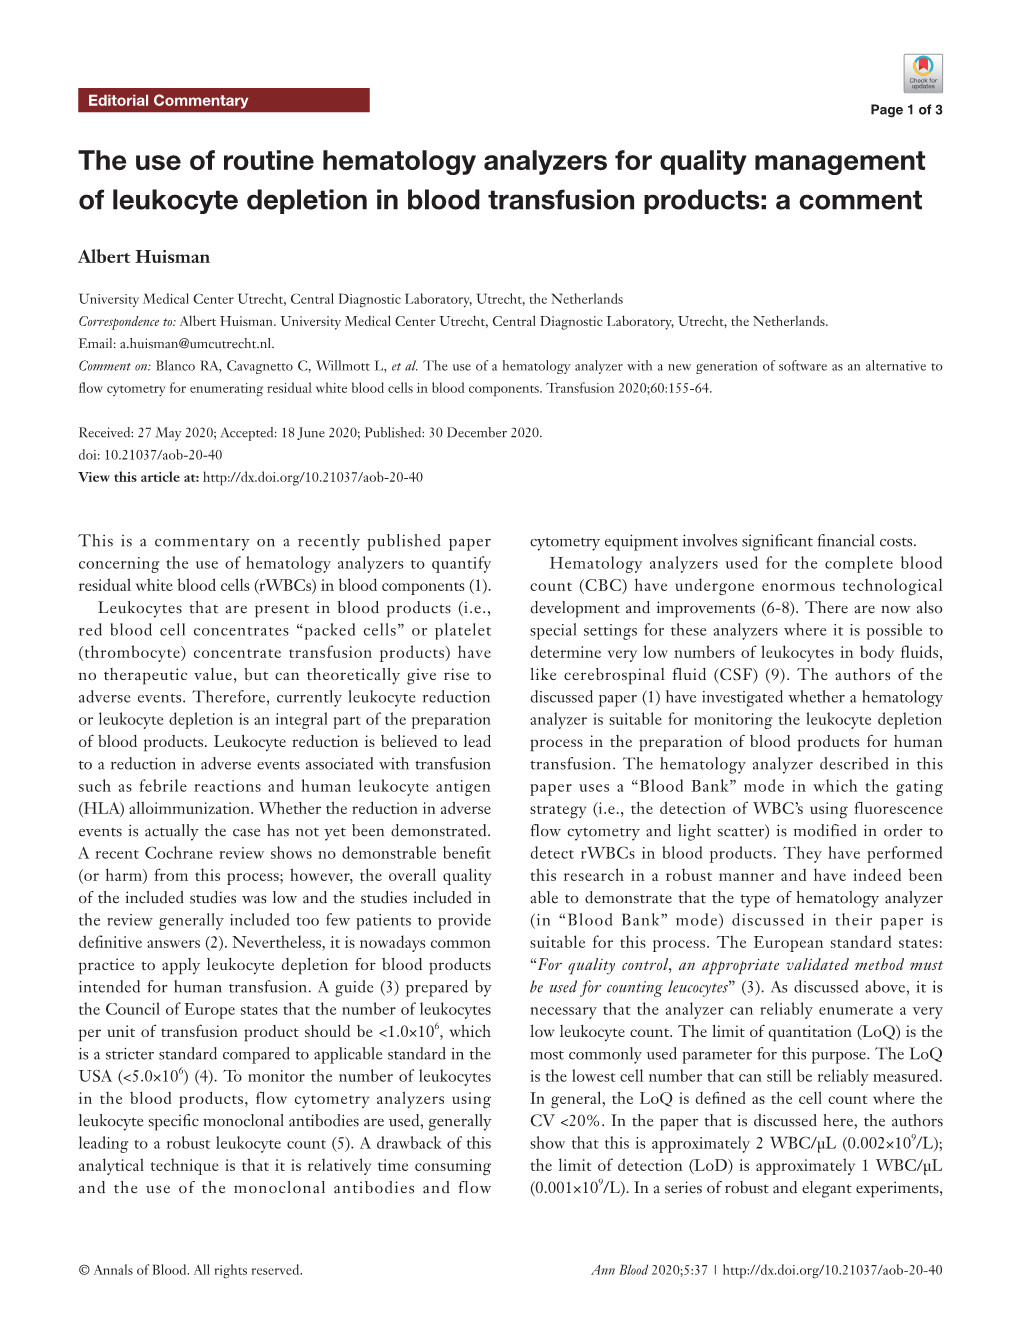 The Use of Routine Hematology Analyzers for Quality Management of Leukocyte Depletion in Blood Transfusion Products: a Comment